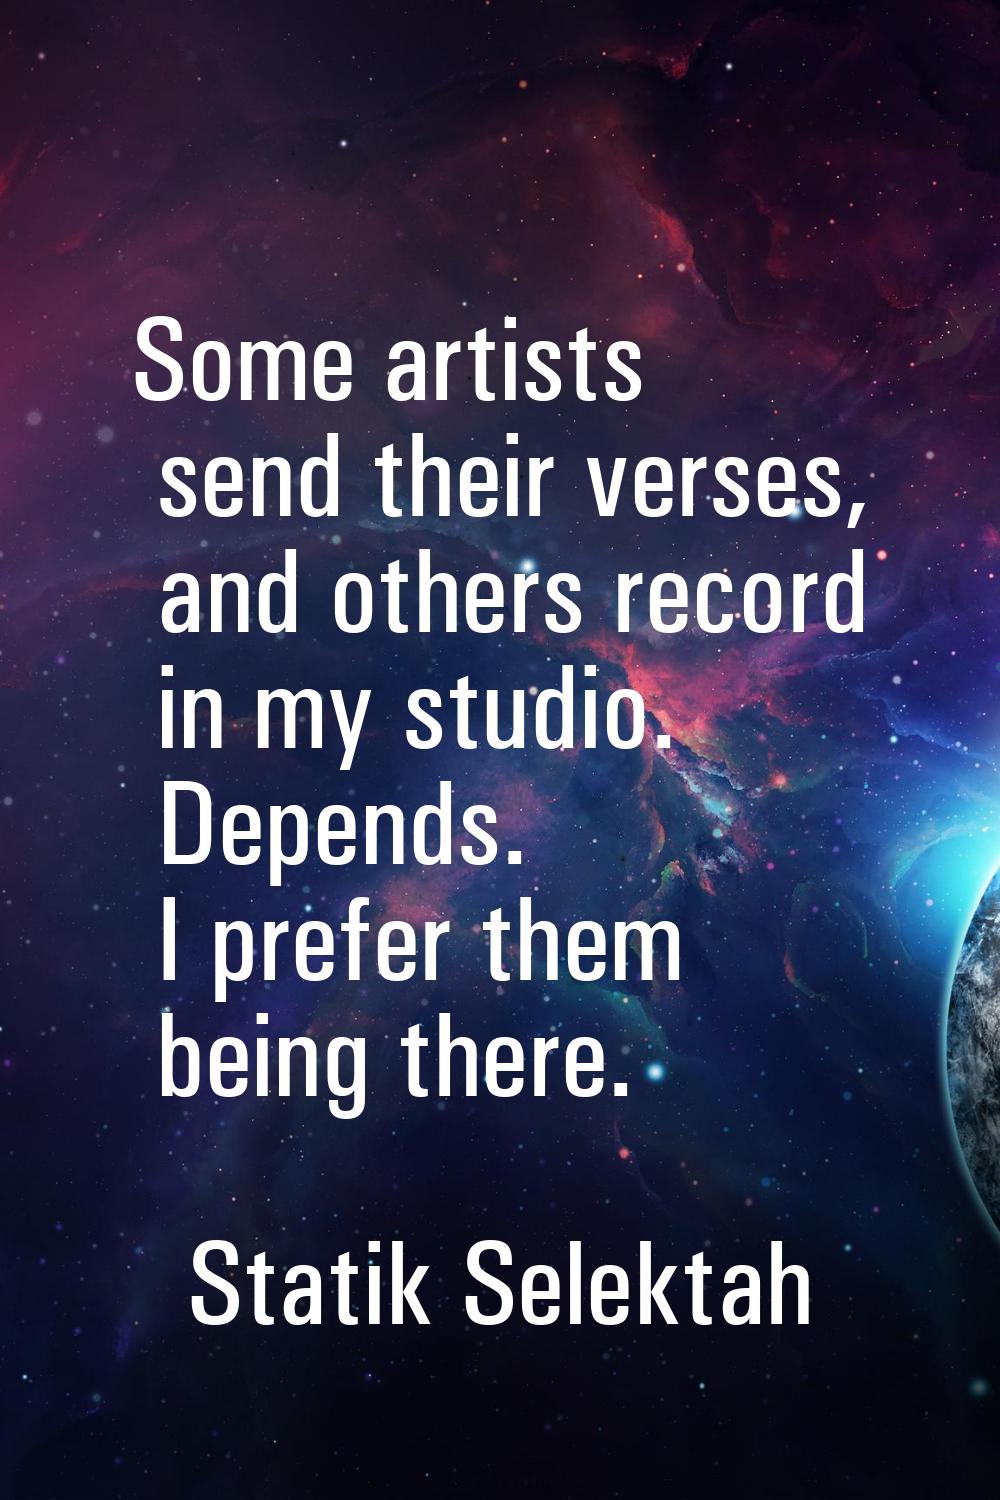 Some artists send their verses, and others record in my studio. Depends. I prefer them being there.